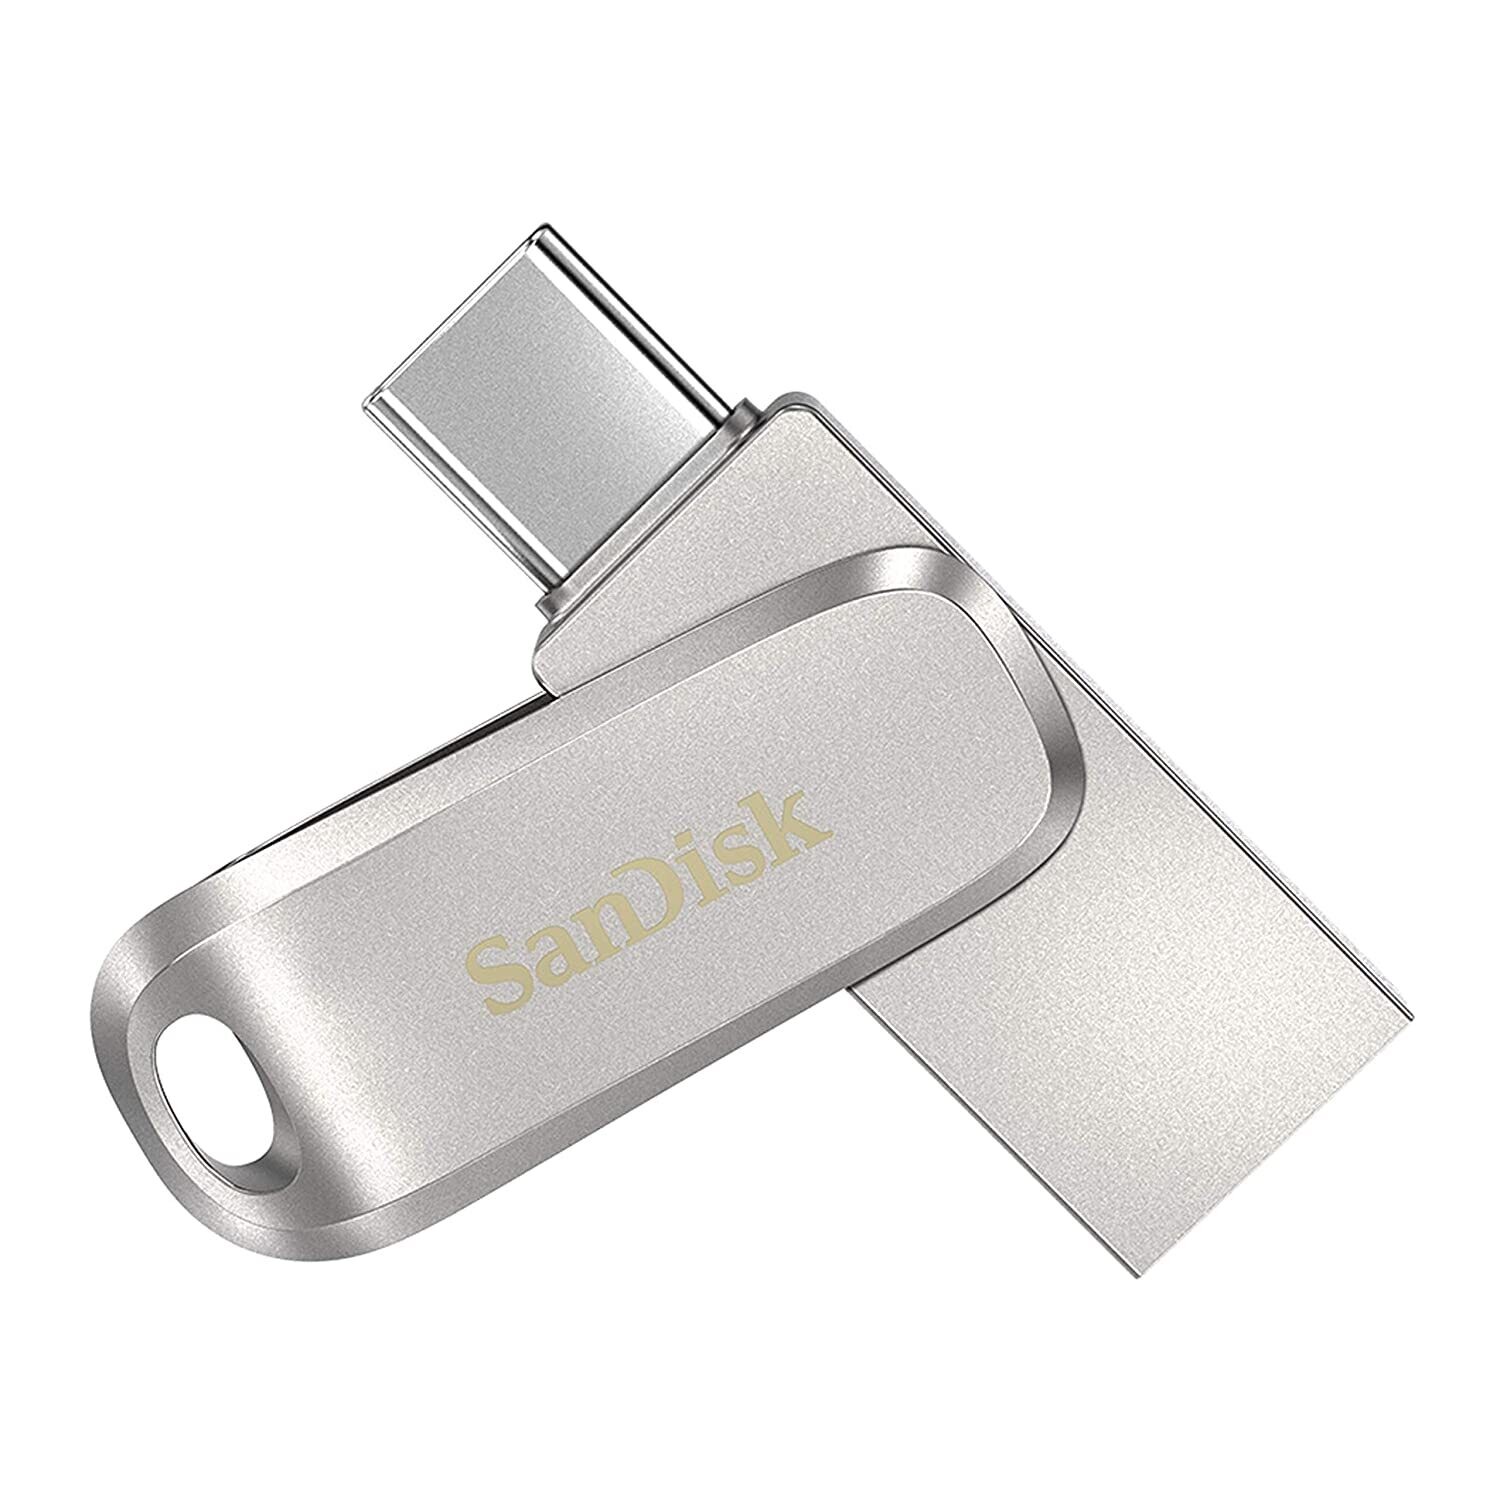 SanDisk 256GB Dual Drive Luxe USB Type-C Pen Drive for mobile